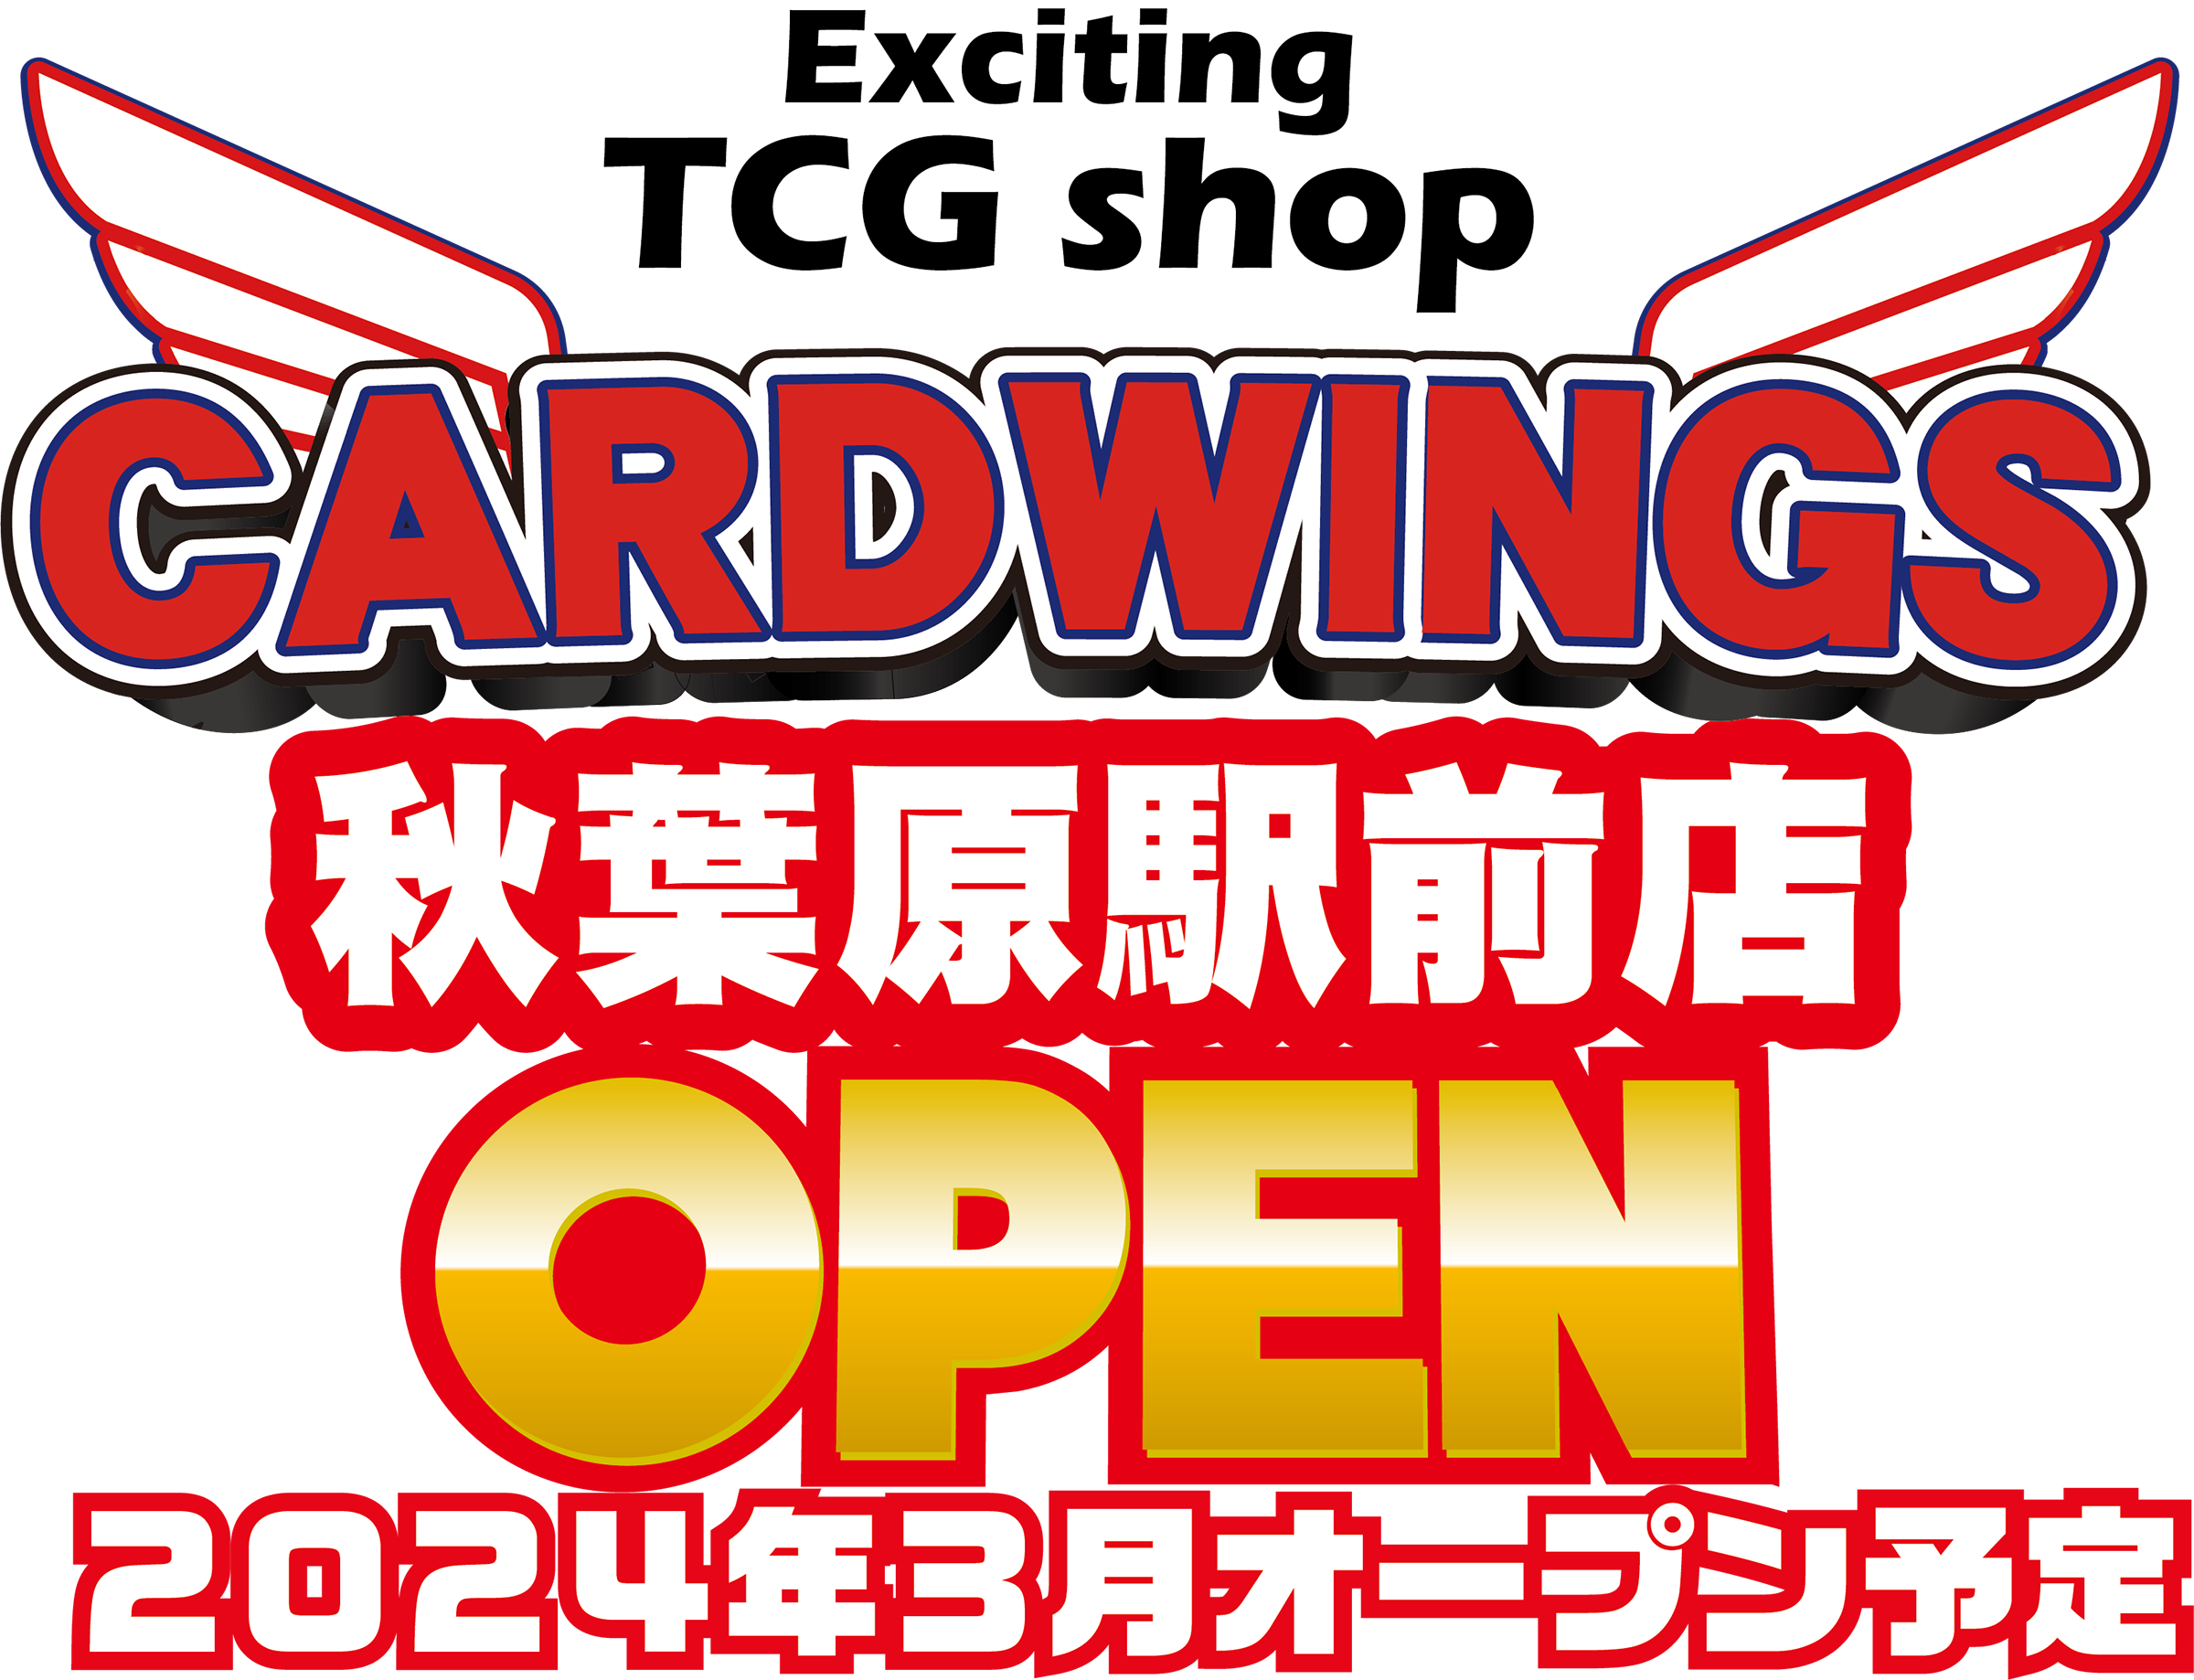 Exciting TCG shop CARDWINGS 秋葉原駅前店 OPEN 2024年3月オープン予定